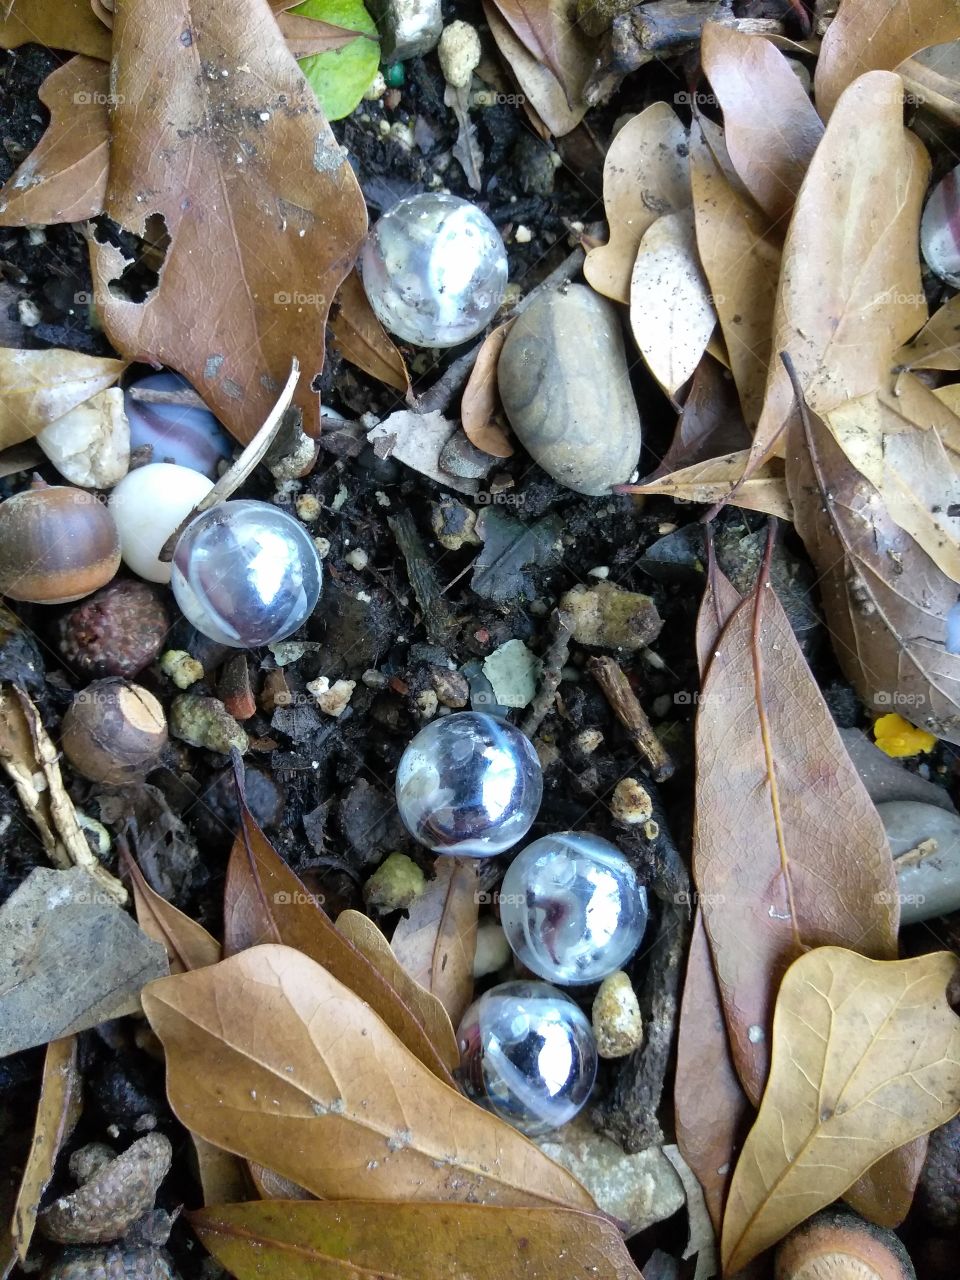 i found the marbles